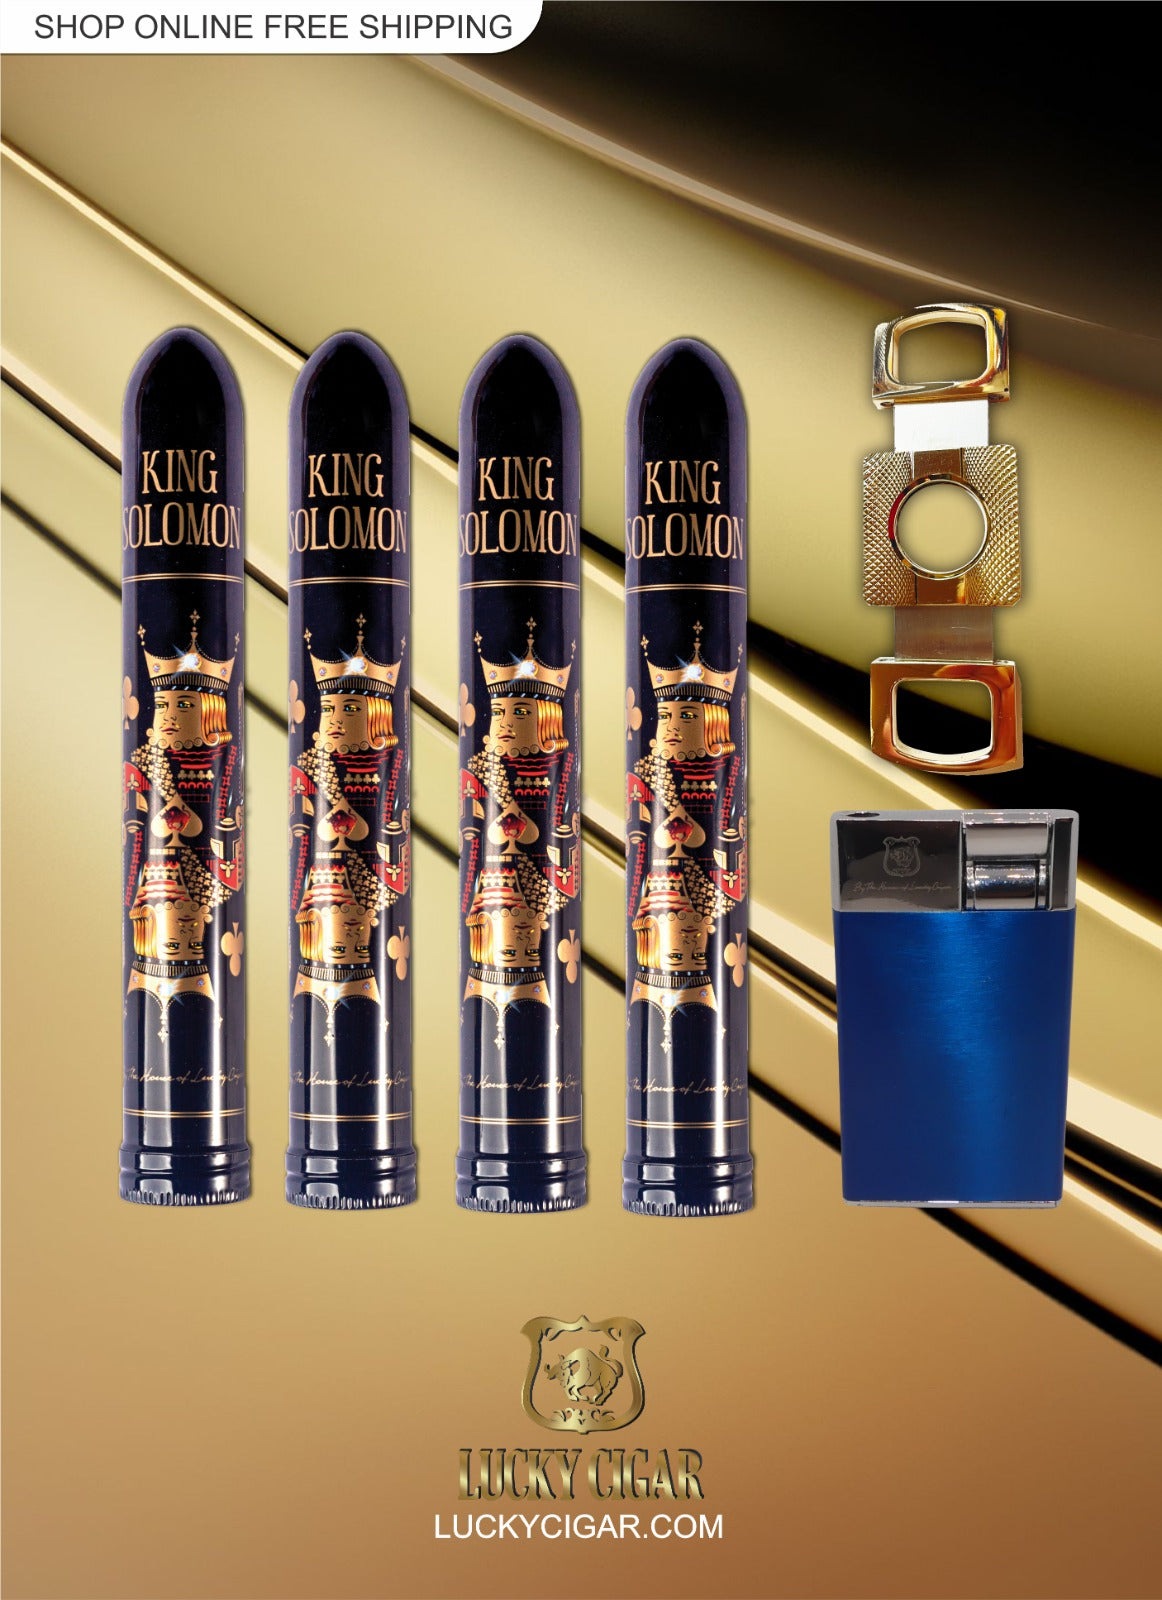 Lucky Cigar Sampler Sets: Set of 4 King Solomon 7x58 Cigars with Slim Torch, Cutter